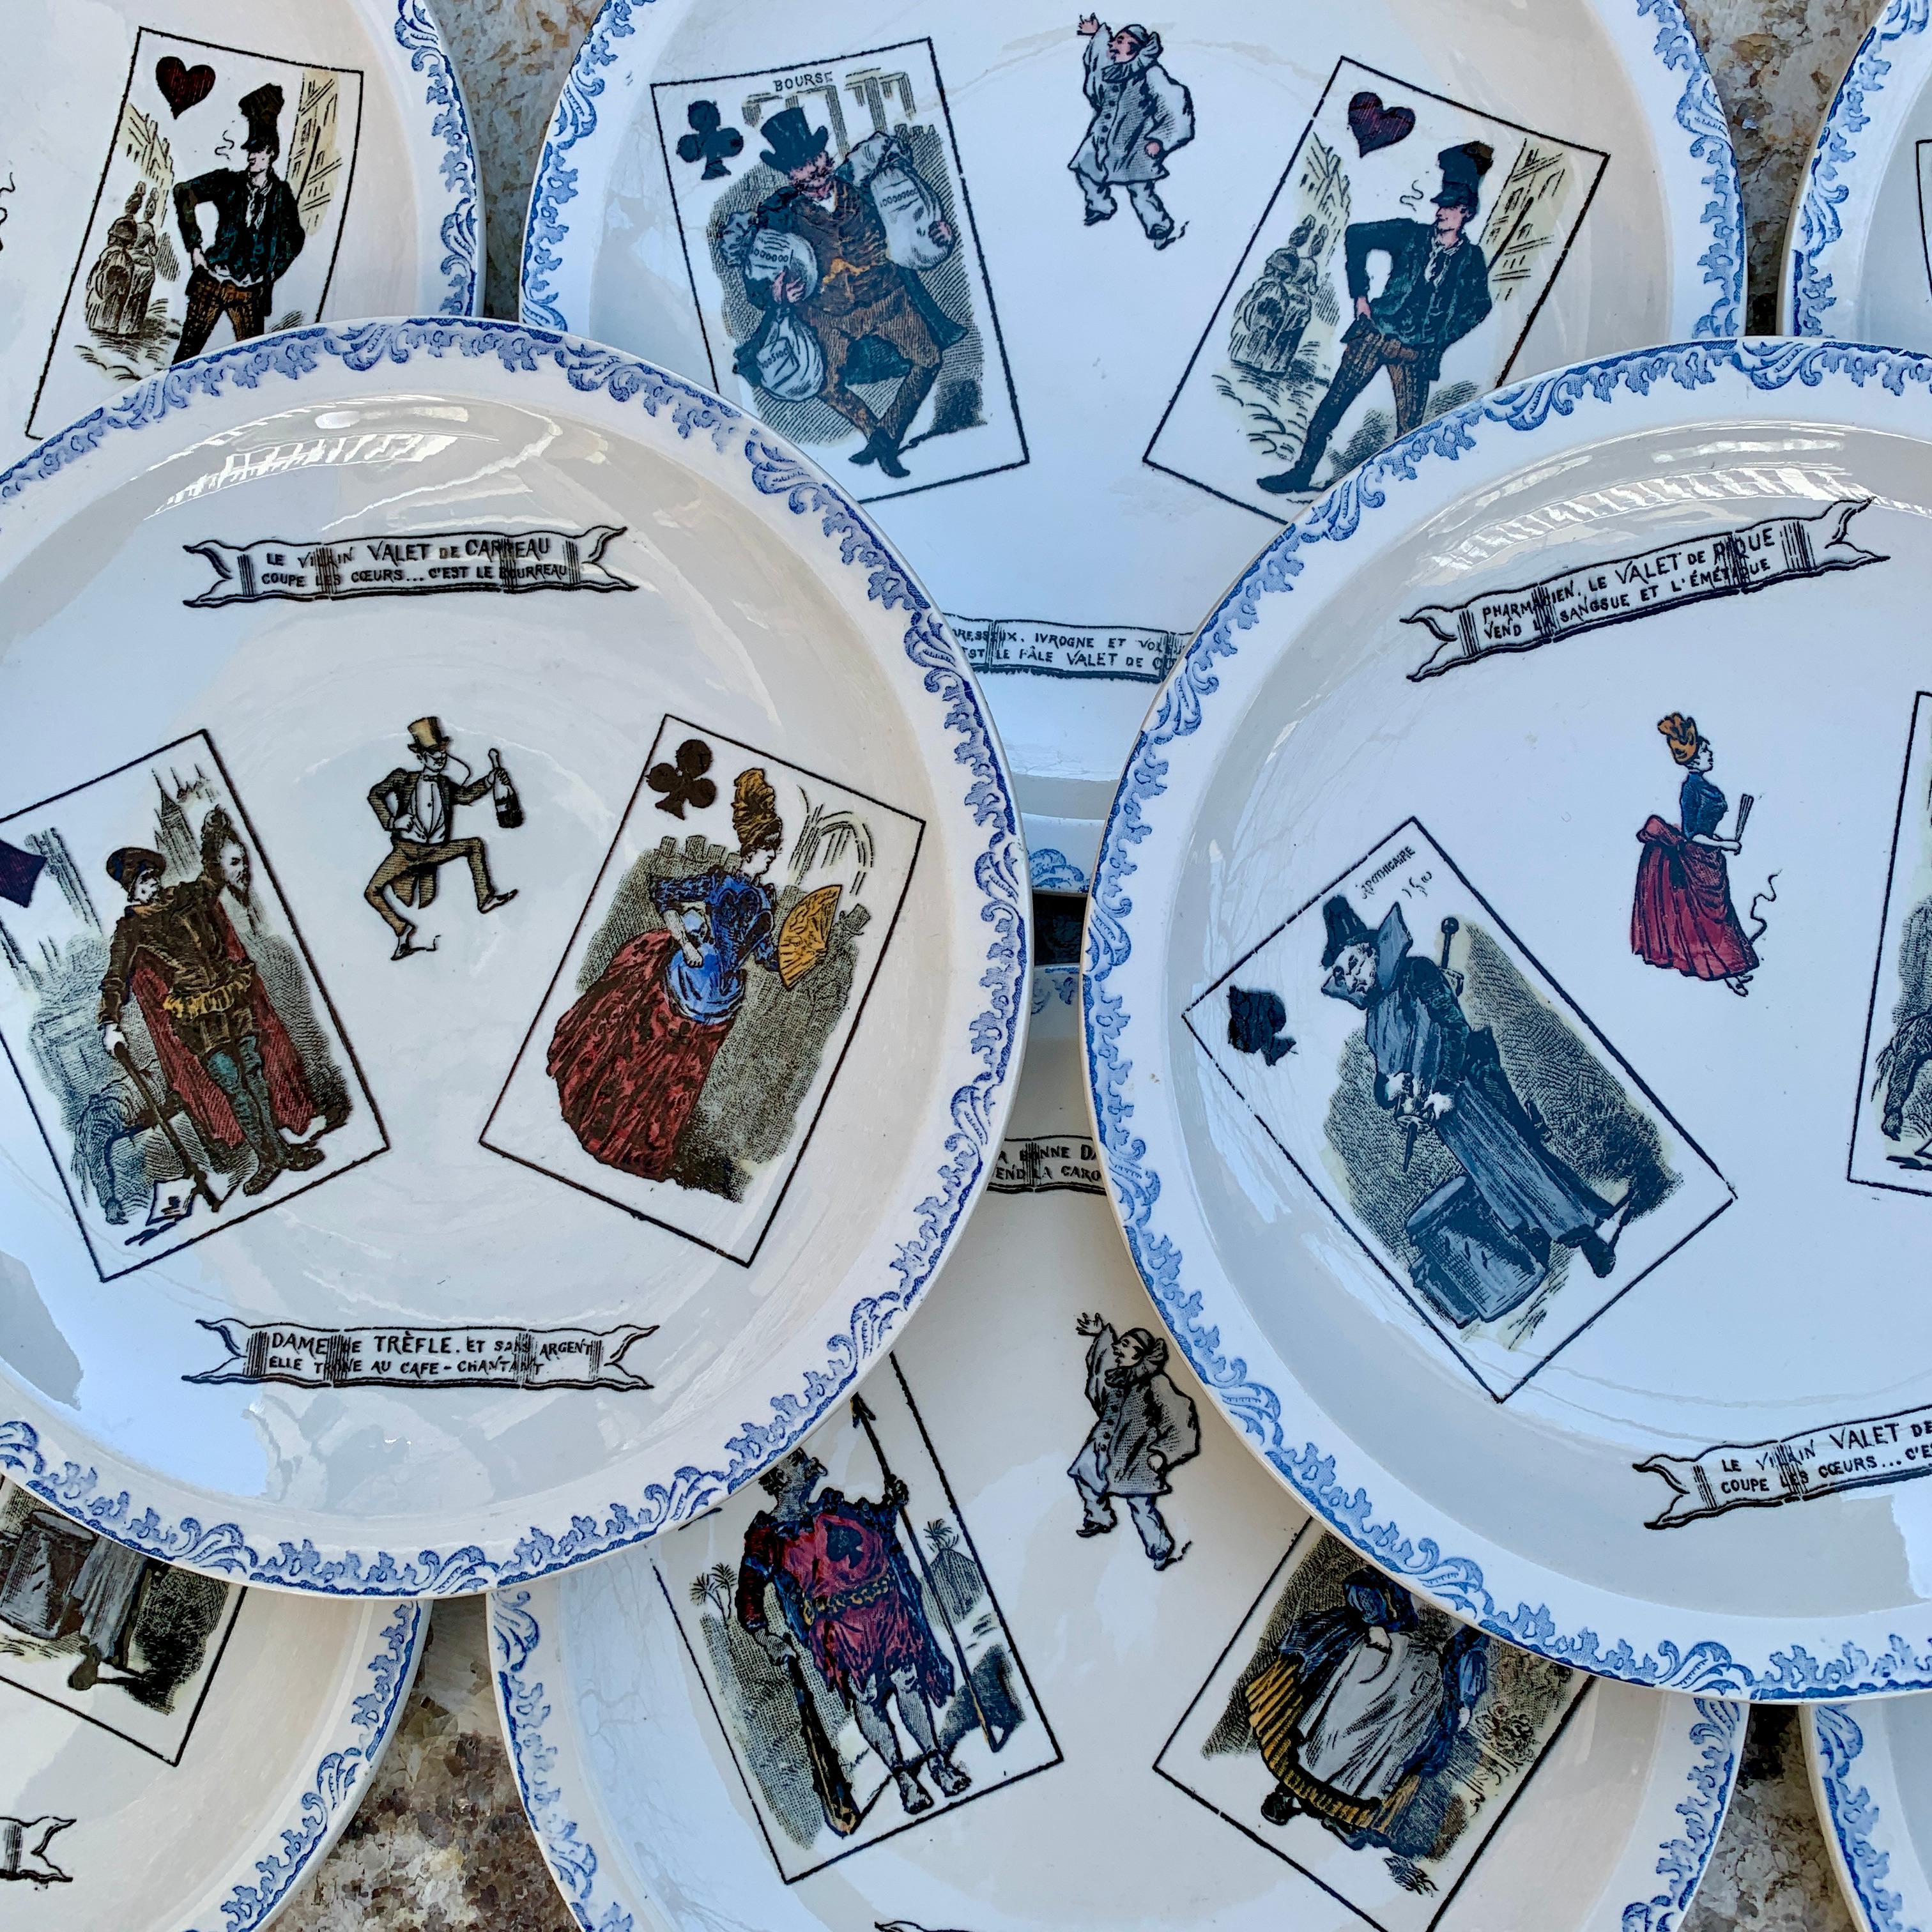 A charming set of eight HBCM, Hippolyte Boulenger Creil Montereau Playing Card Faience Plates- France, circa 1920s.

Known as assiettes parlantes or talking plates, this set is based on the face cards of a playing deck. A cream colored earthenware